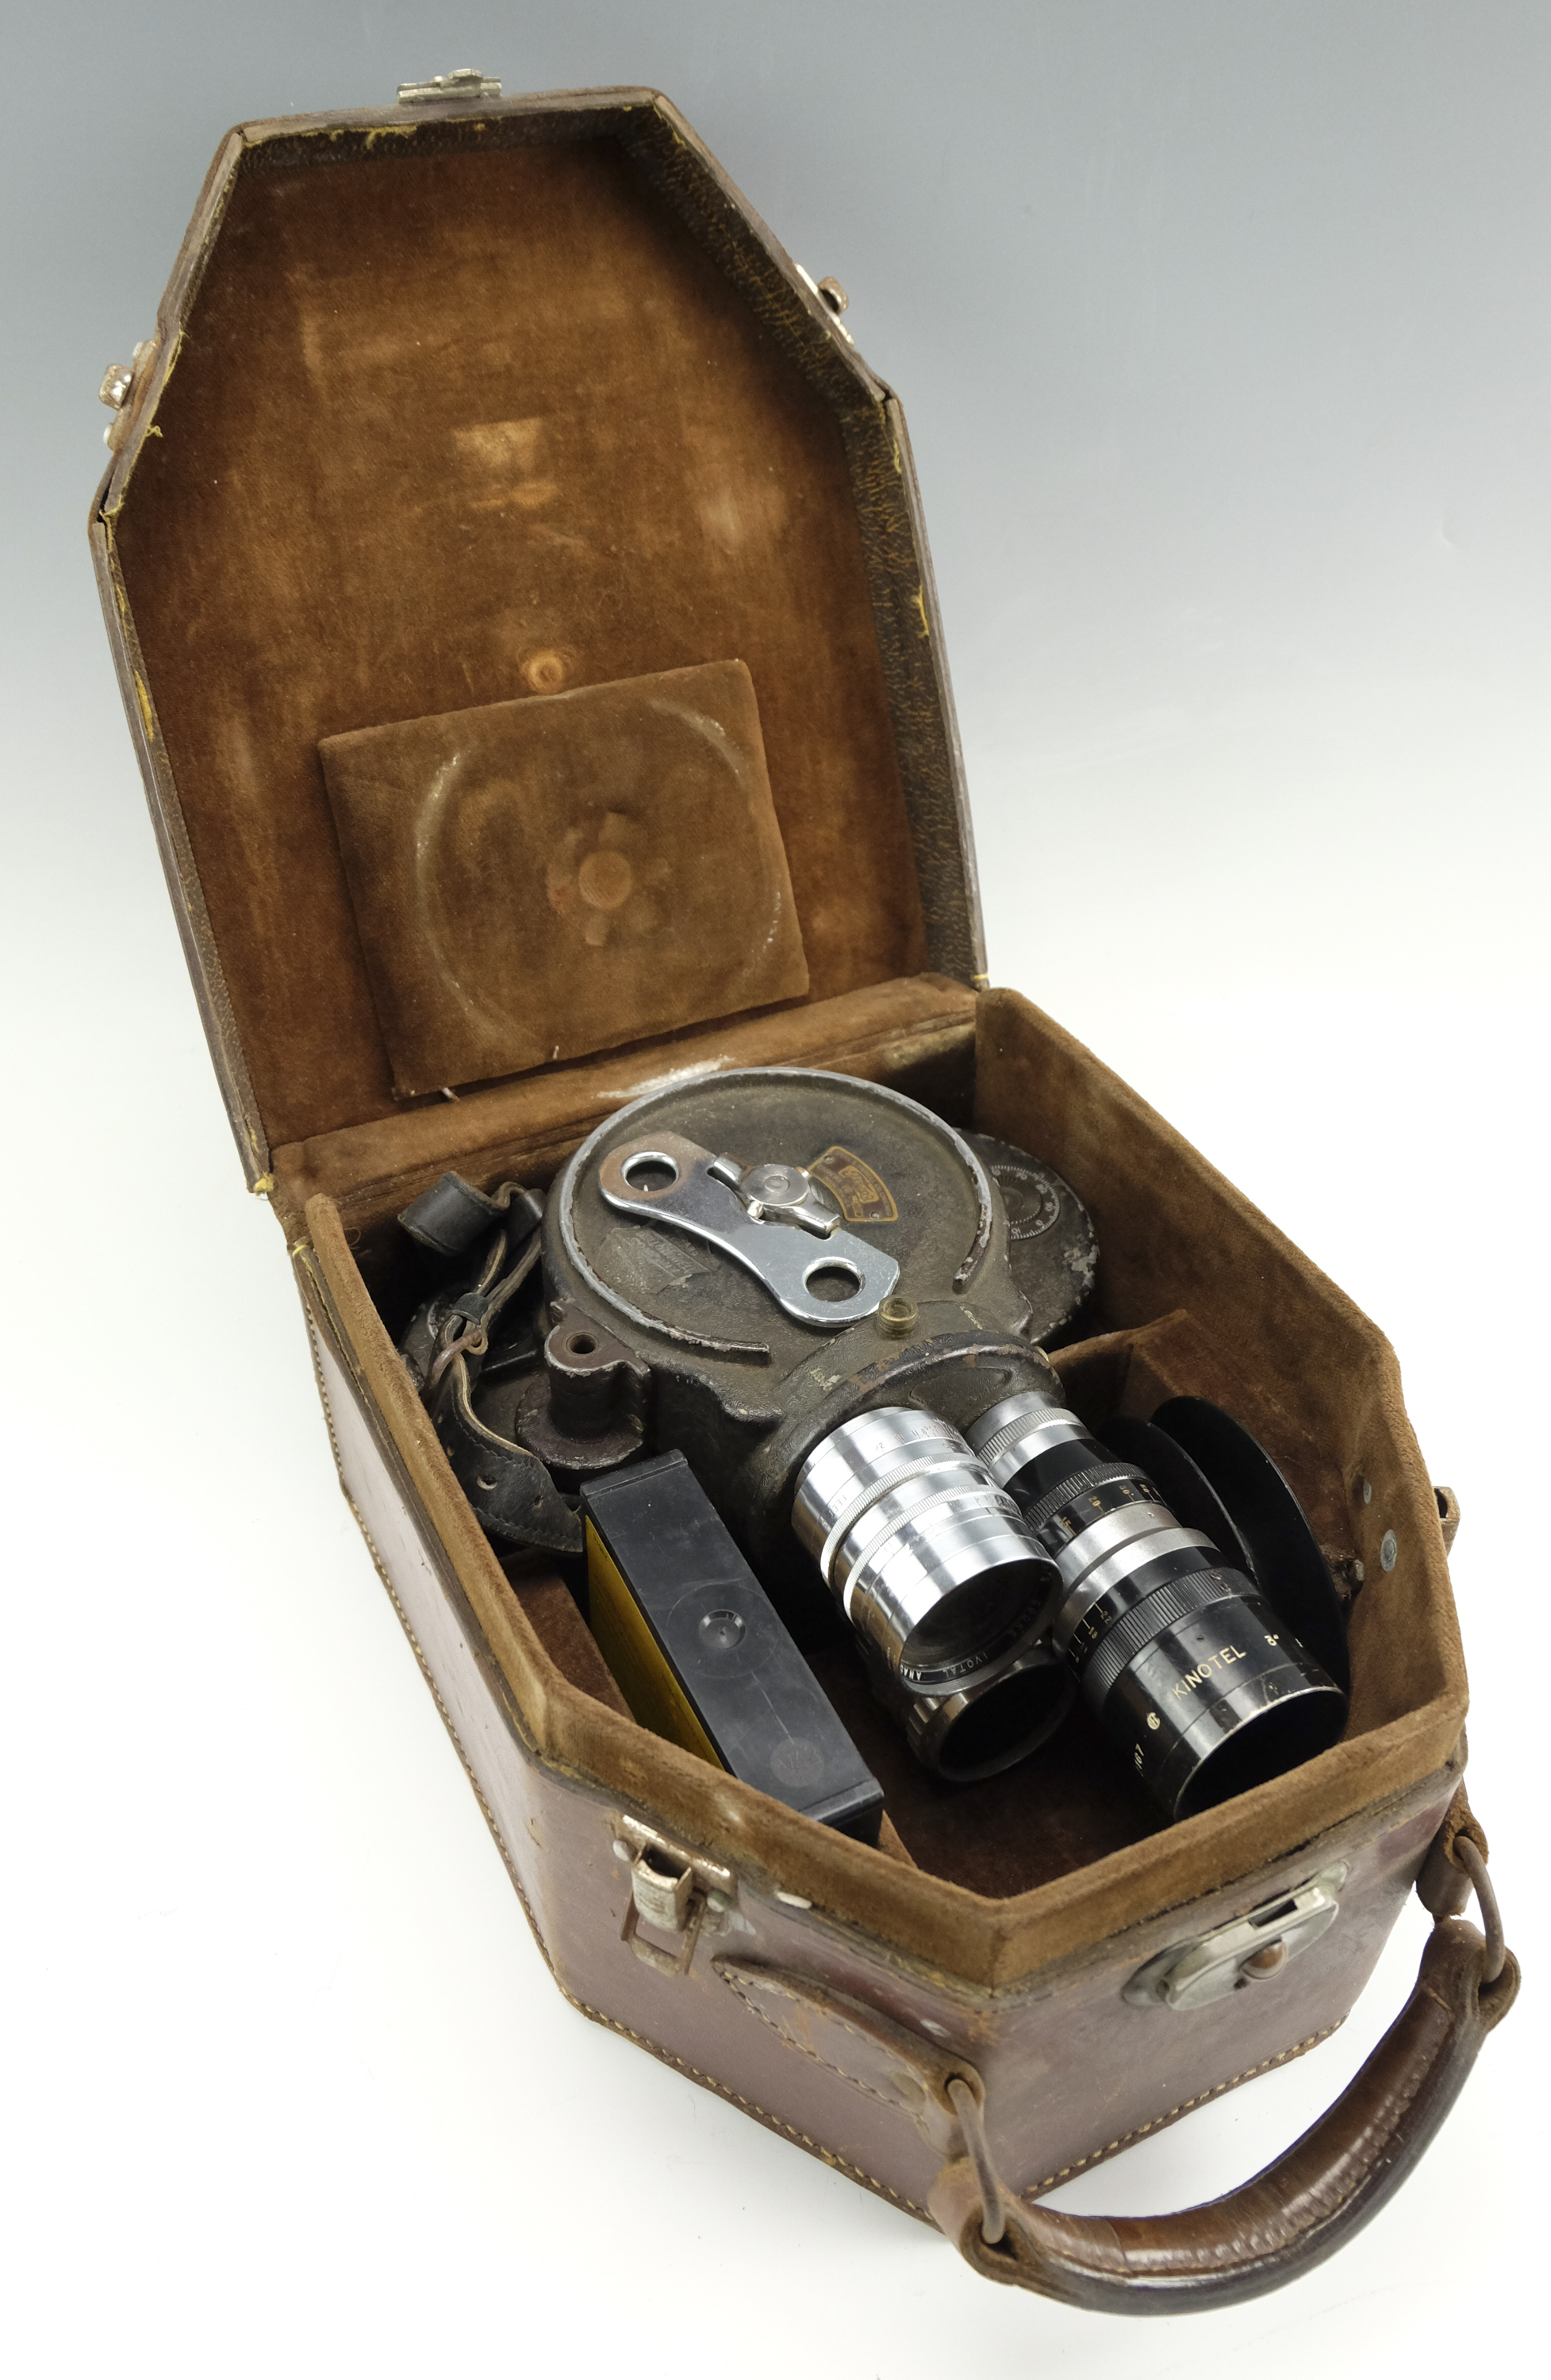 A cased Bell & Howell Filmo 70-DA 16 mm cine camera body, having a three lens turret mounted with